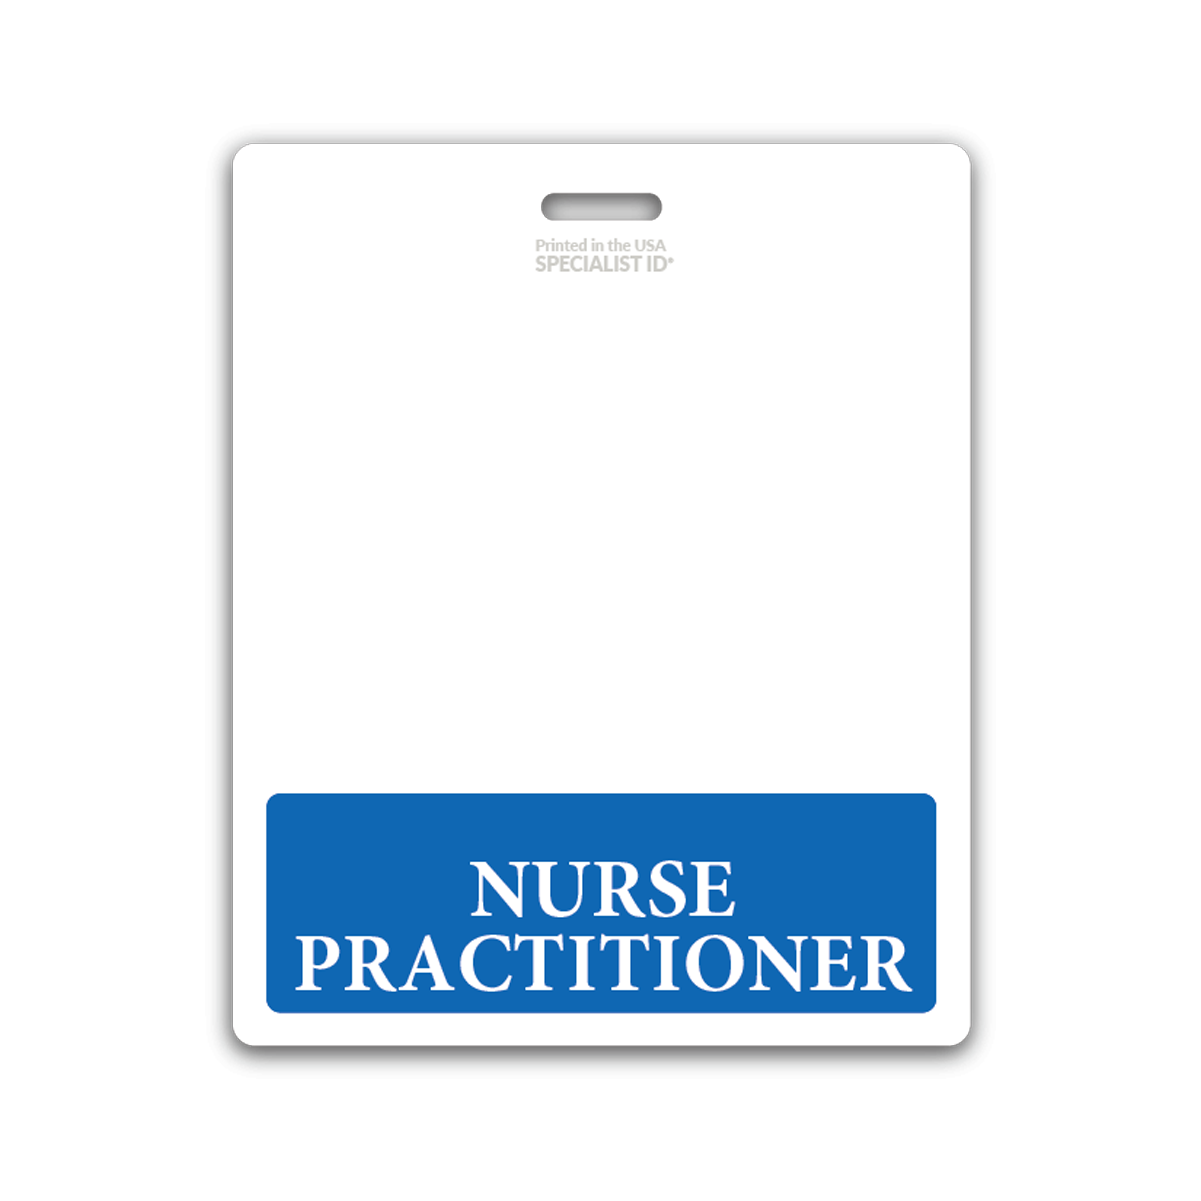 Extra Large and Long Nurse Practitioner Badge Buddy with Blue Border - Double Side Print